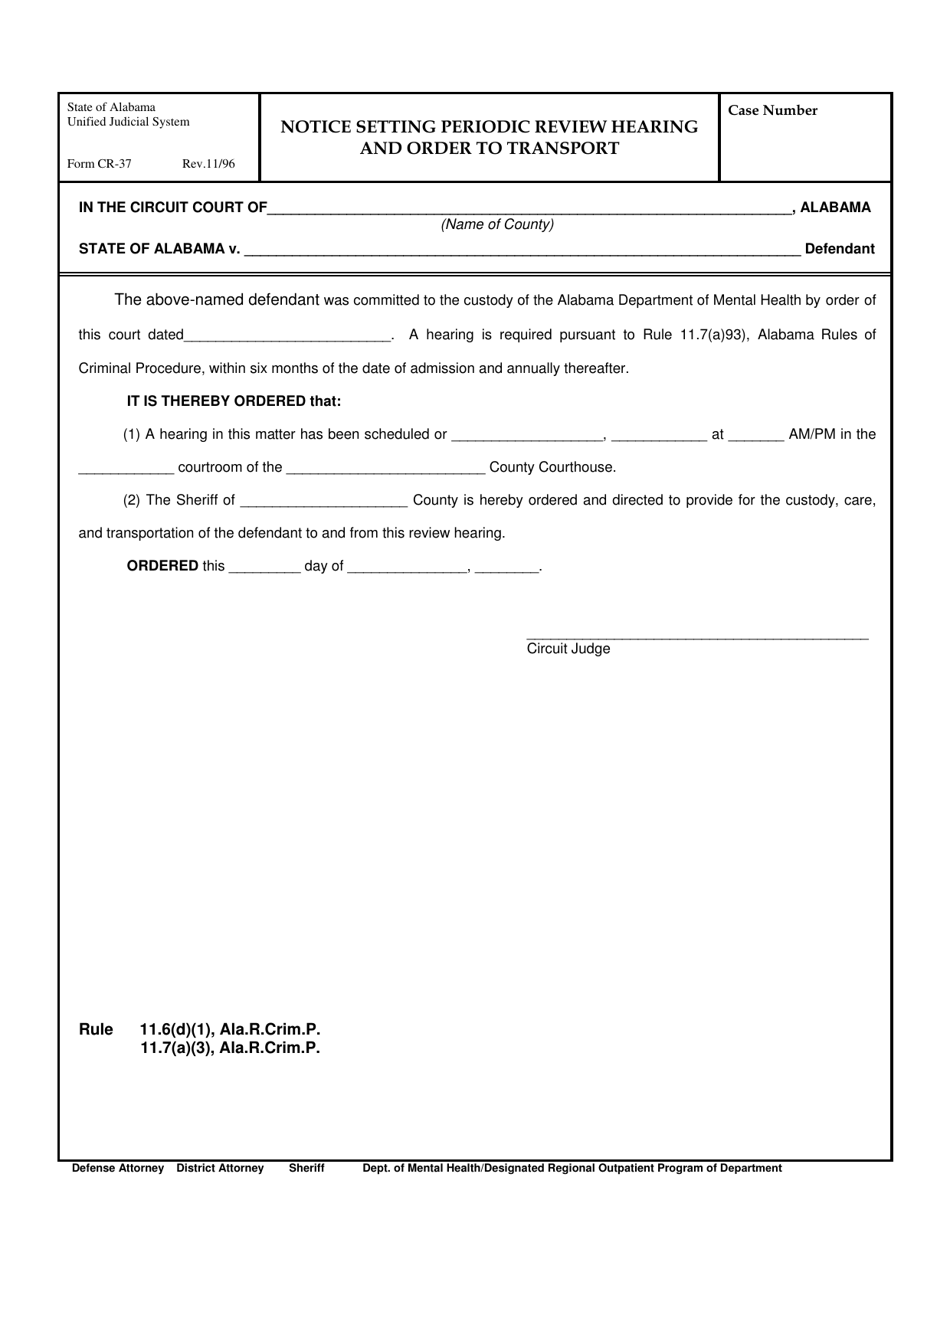 Form CR-37 Notice Setting Periodic Review Hearing and Order to Transport - Alabama, Page 1